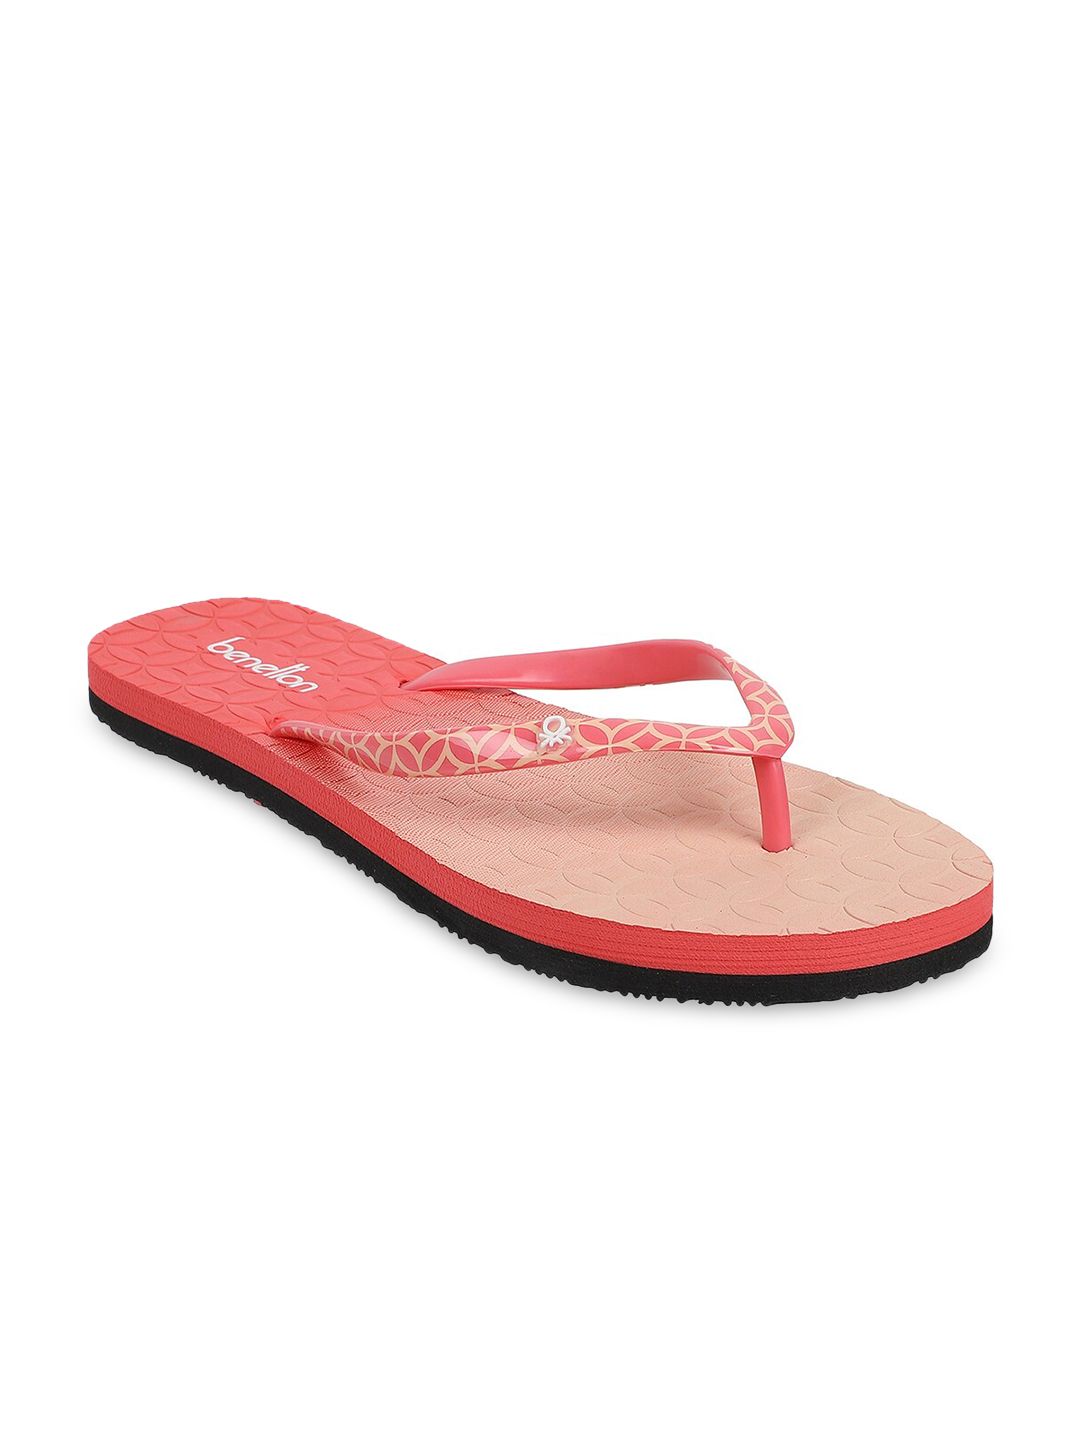 United Colors of Benetton Women Peach-Coloured & Coral Printed Rubber Thong Flip-Flops Price in India